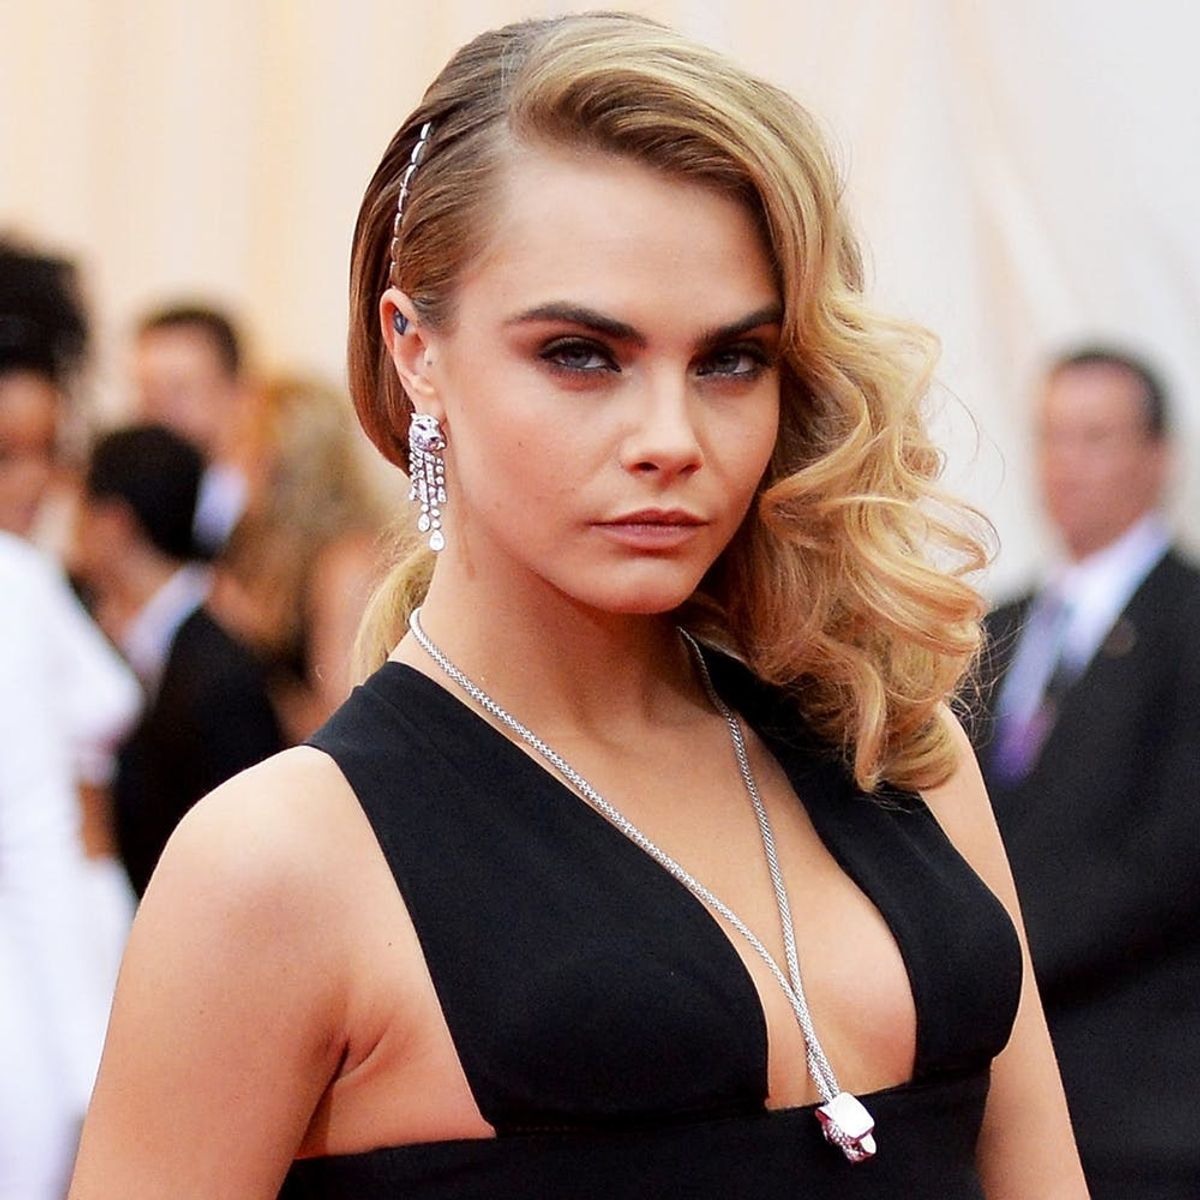 How to Copy 4 of Cara Delevingne’s Super Luxe Hair Accessories